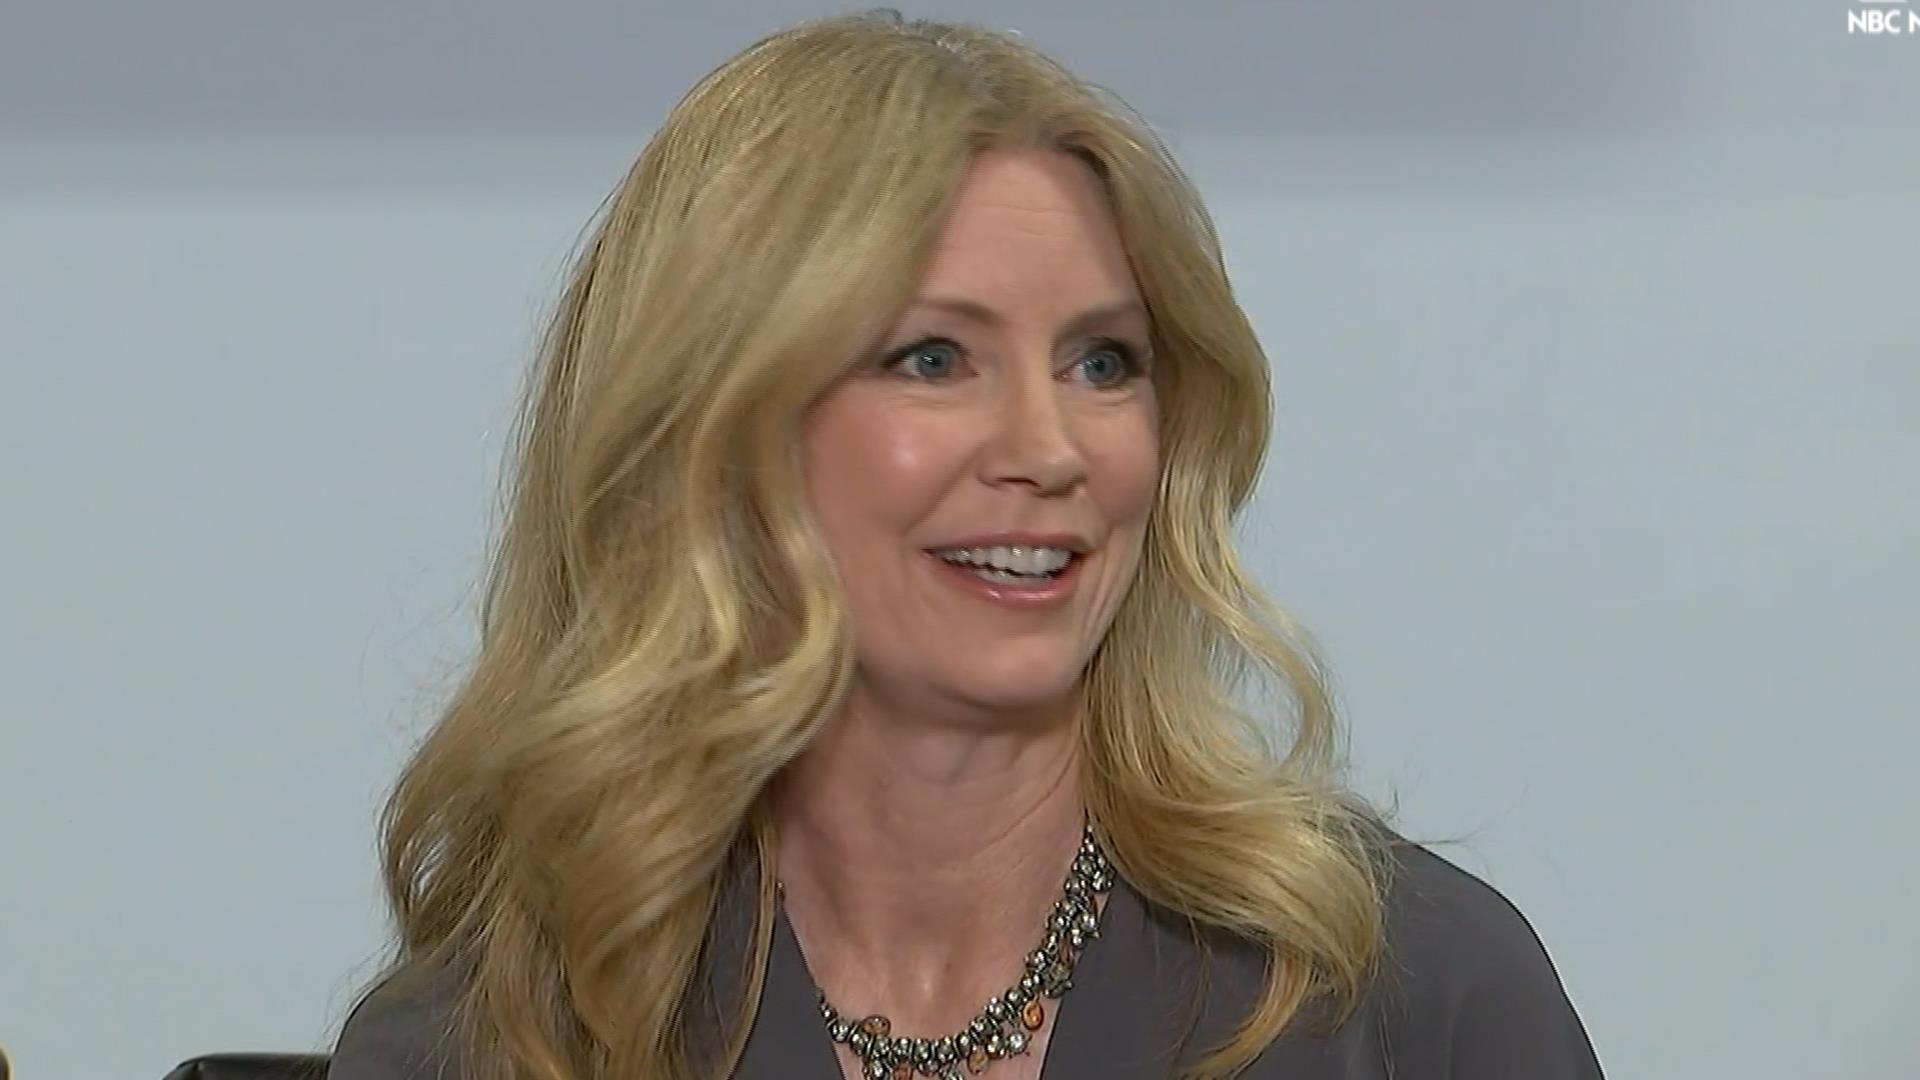 Wendy Walsh Speaks About Bill O'Reilly Harassment Allegations - NBC News